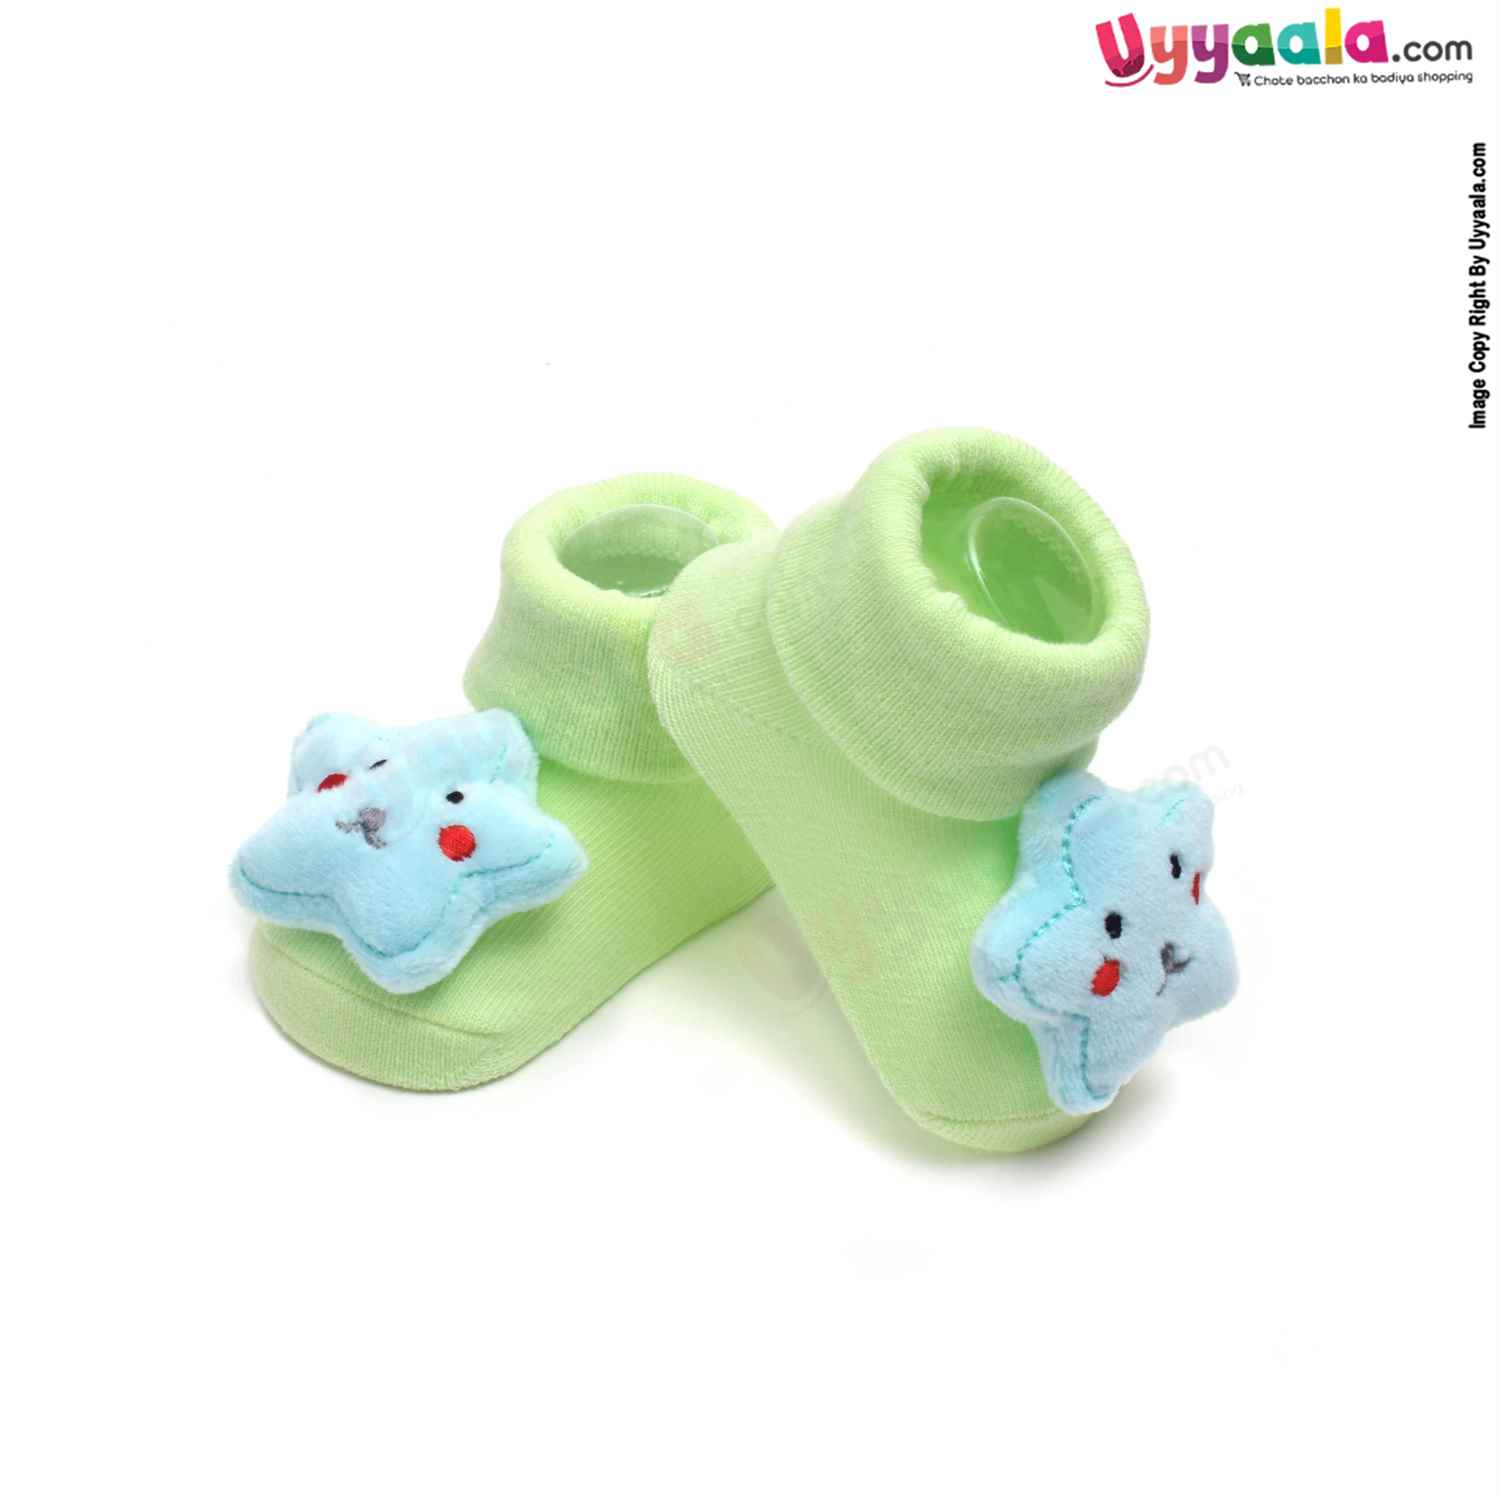 Hosiery Cotton Baby Socks with Star Character ,0 to 12m Age- Green